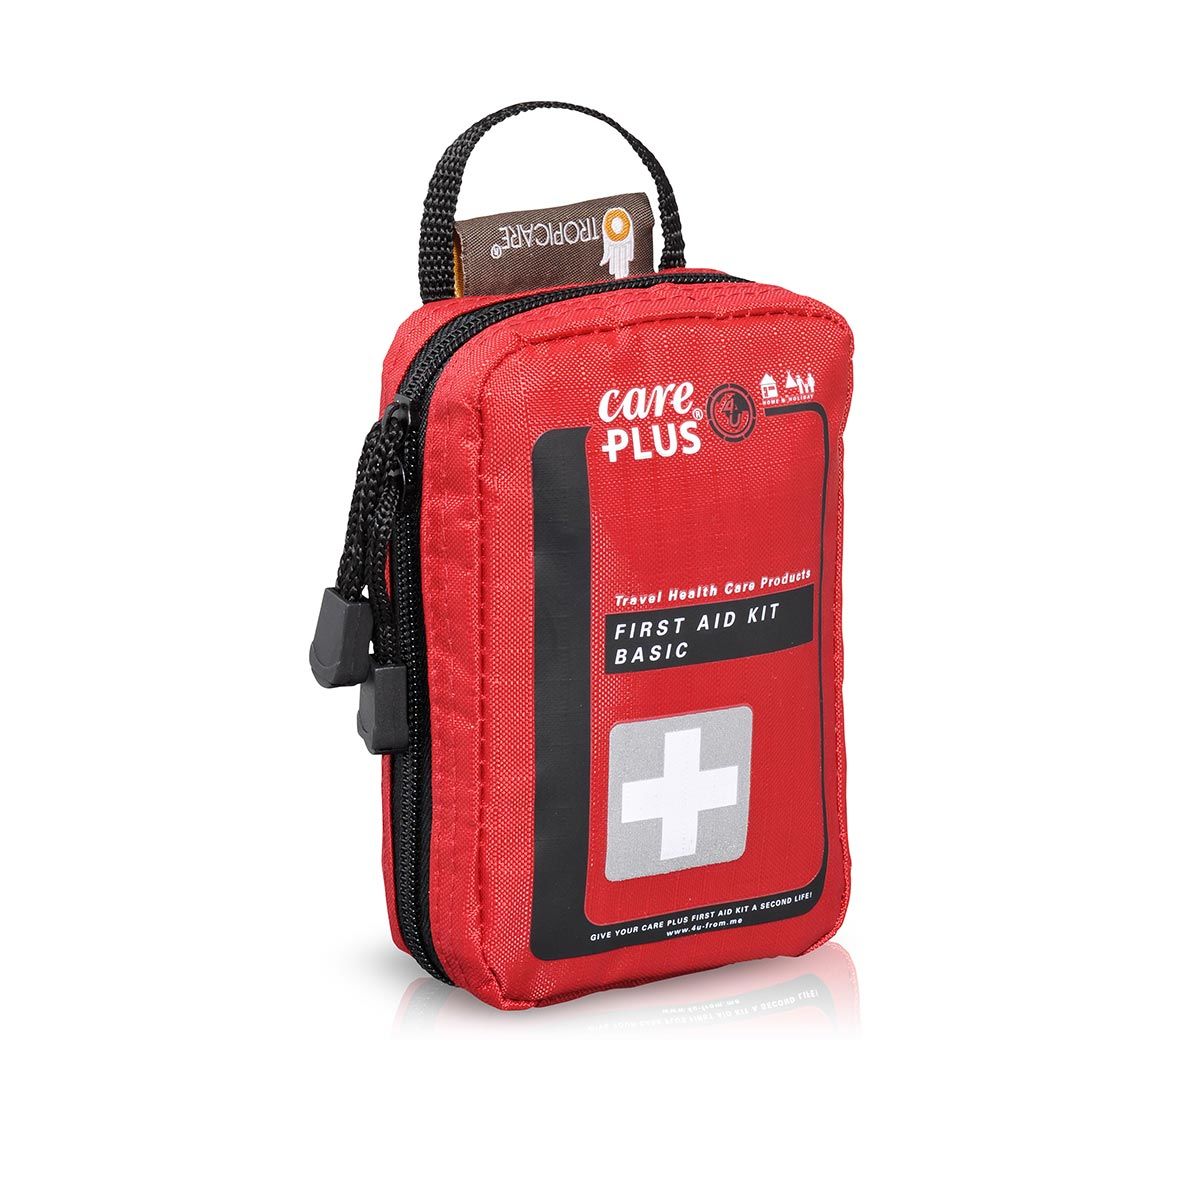 Care Plus first aid kit - Basic